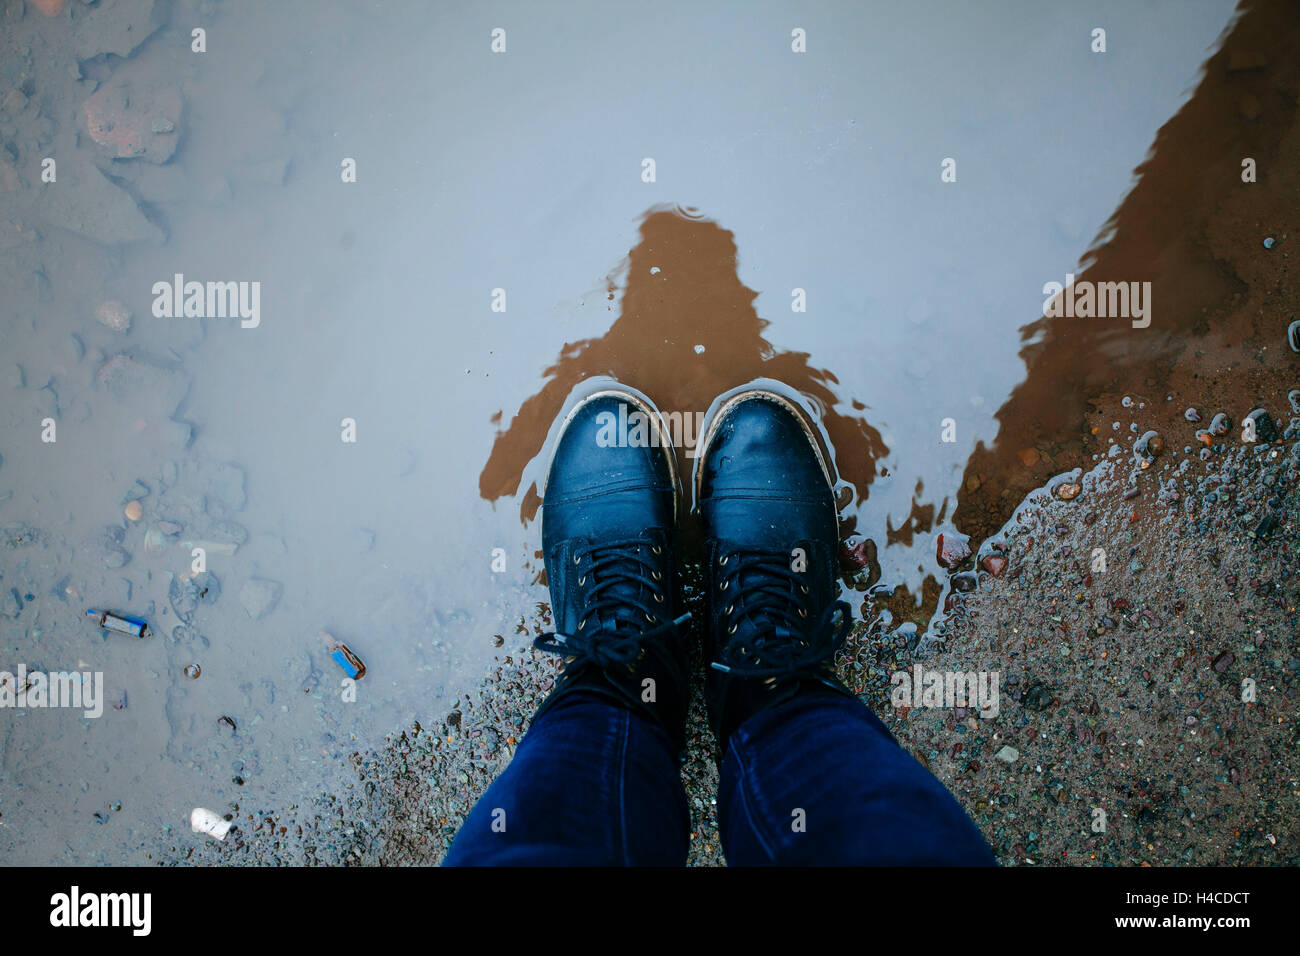 Person, vertical, shoes in puddle, view from above Stock Photo